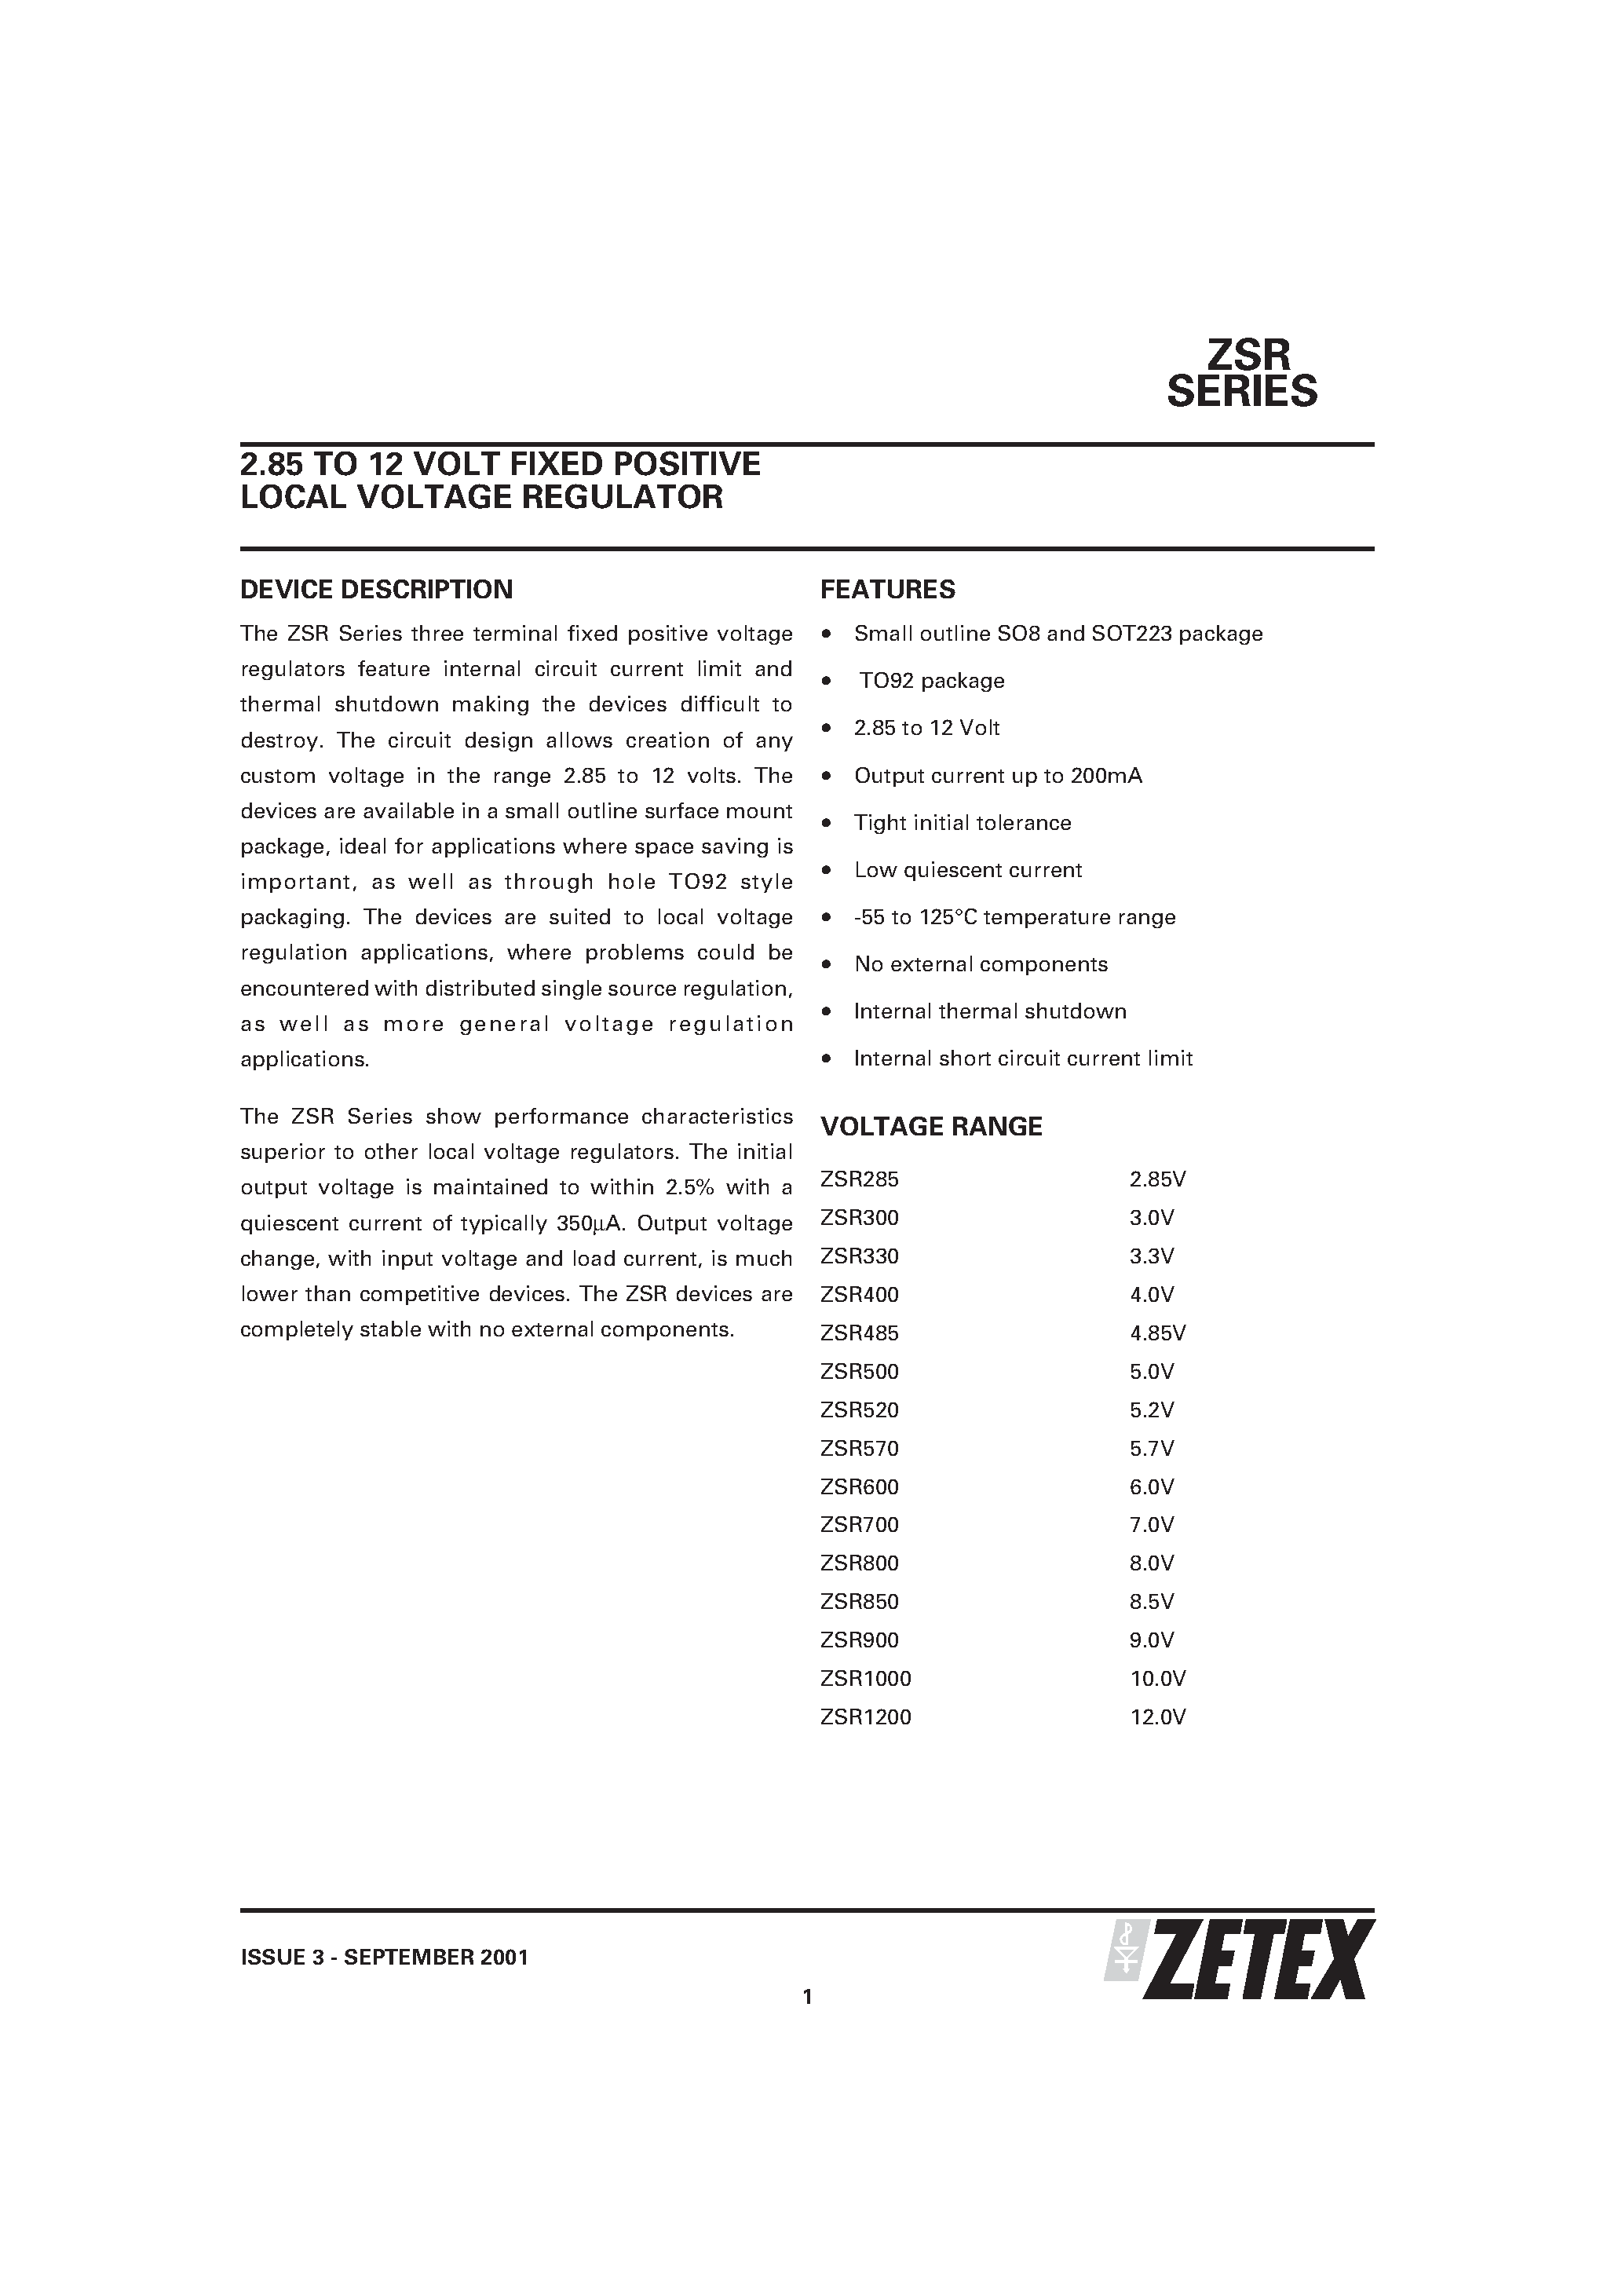 Datasheet ZSR600C - 2.85 TO 12 VOLT FIXED POSITIVE LOCAL VOLTAGE REGULATOR page 1